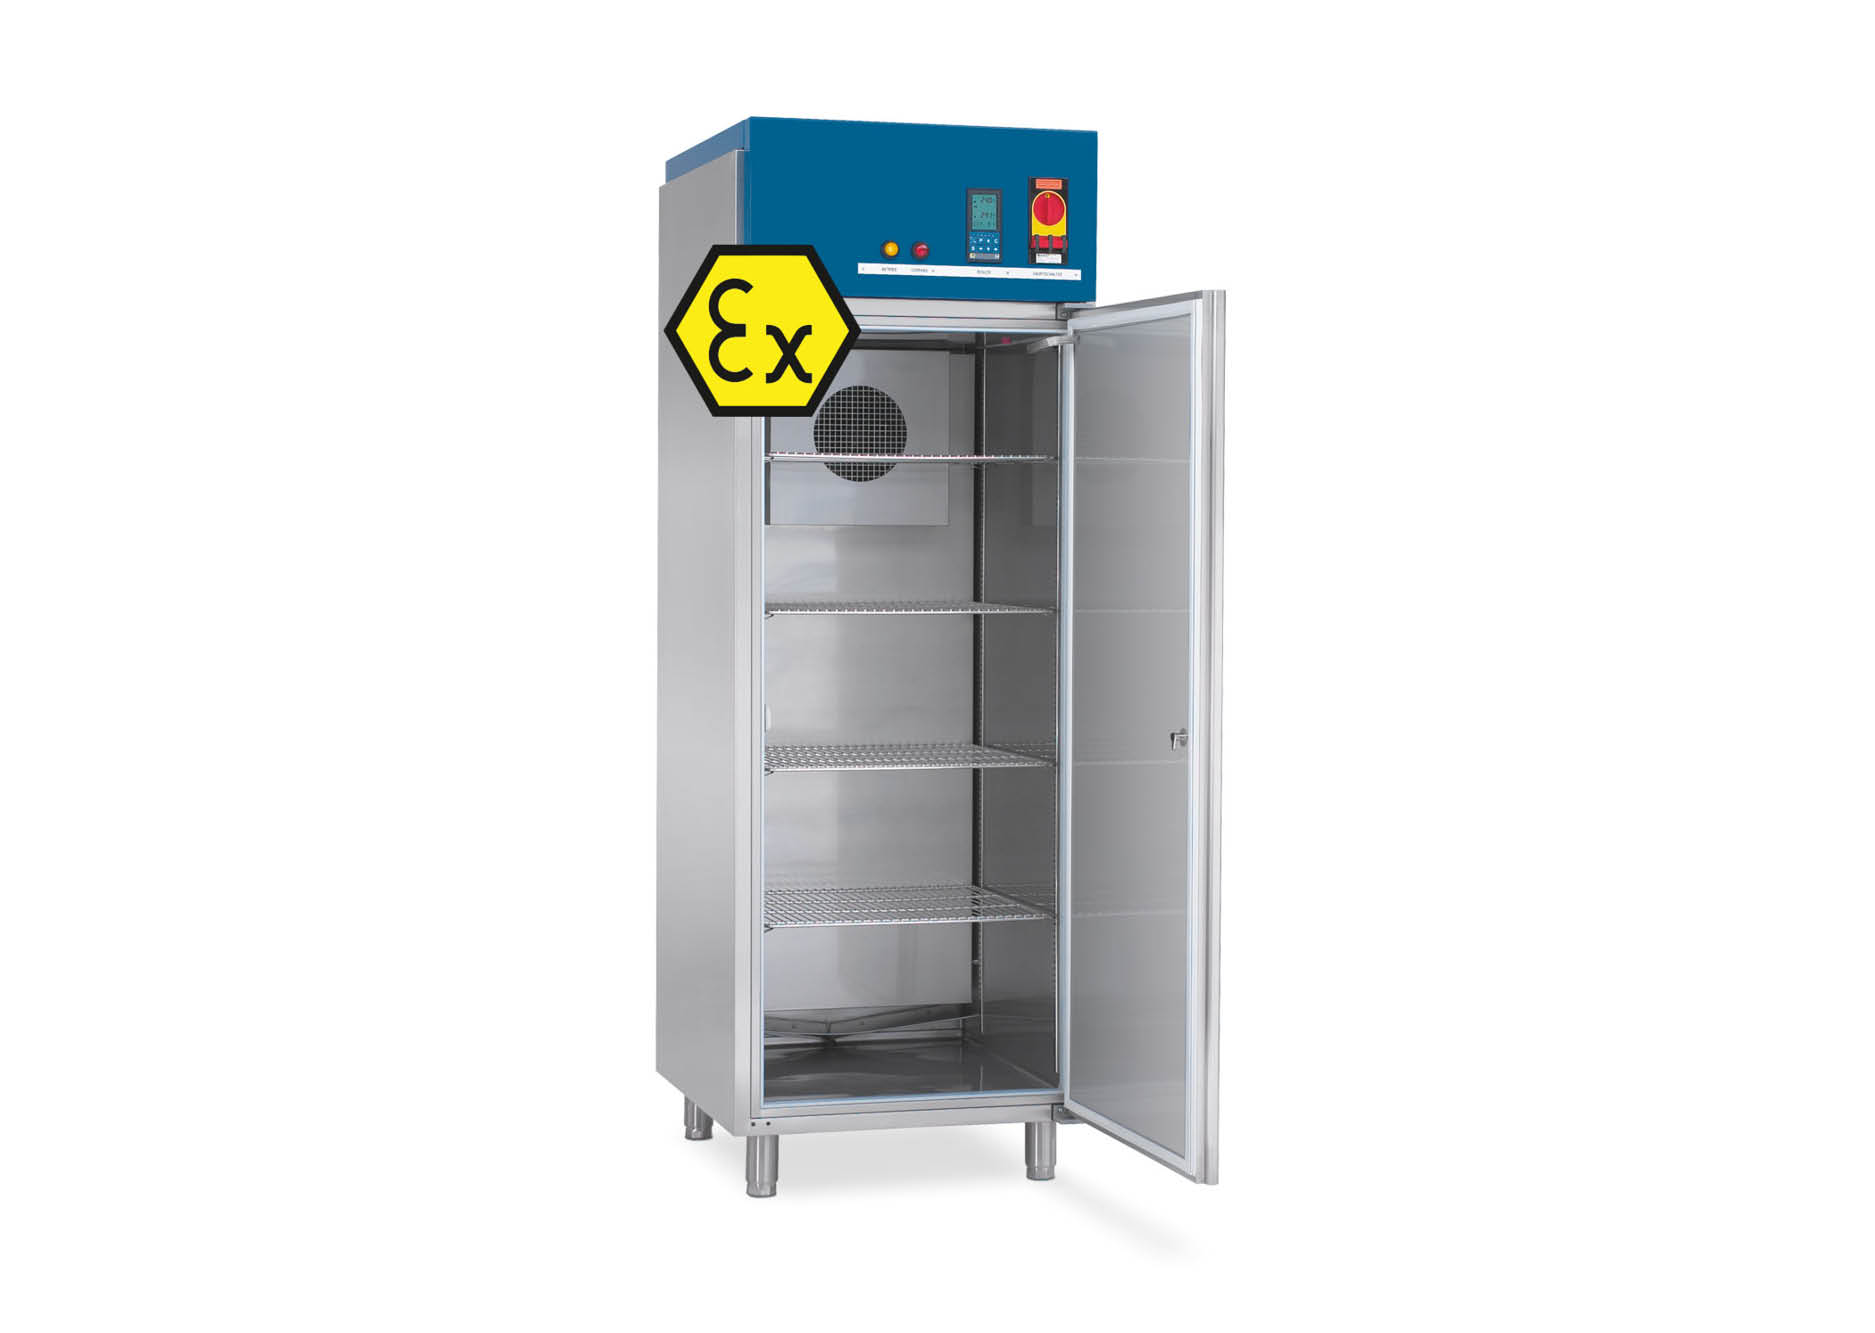 Rumed Safety X-line – switch cabinet